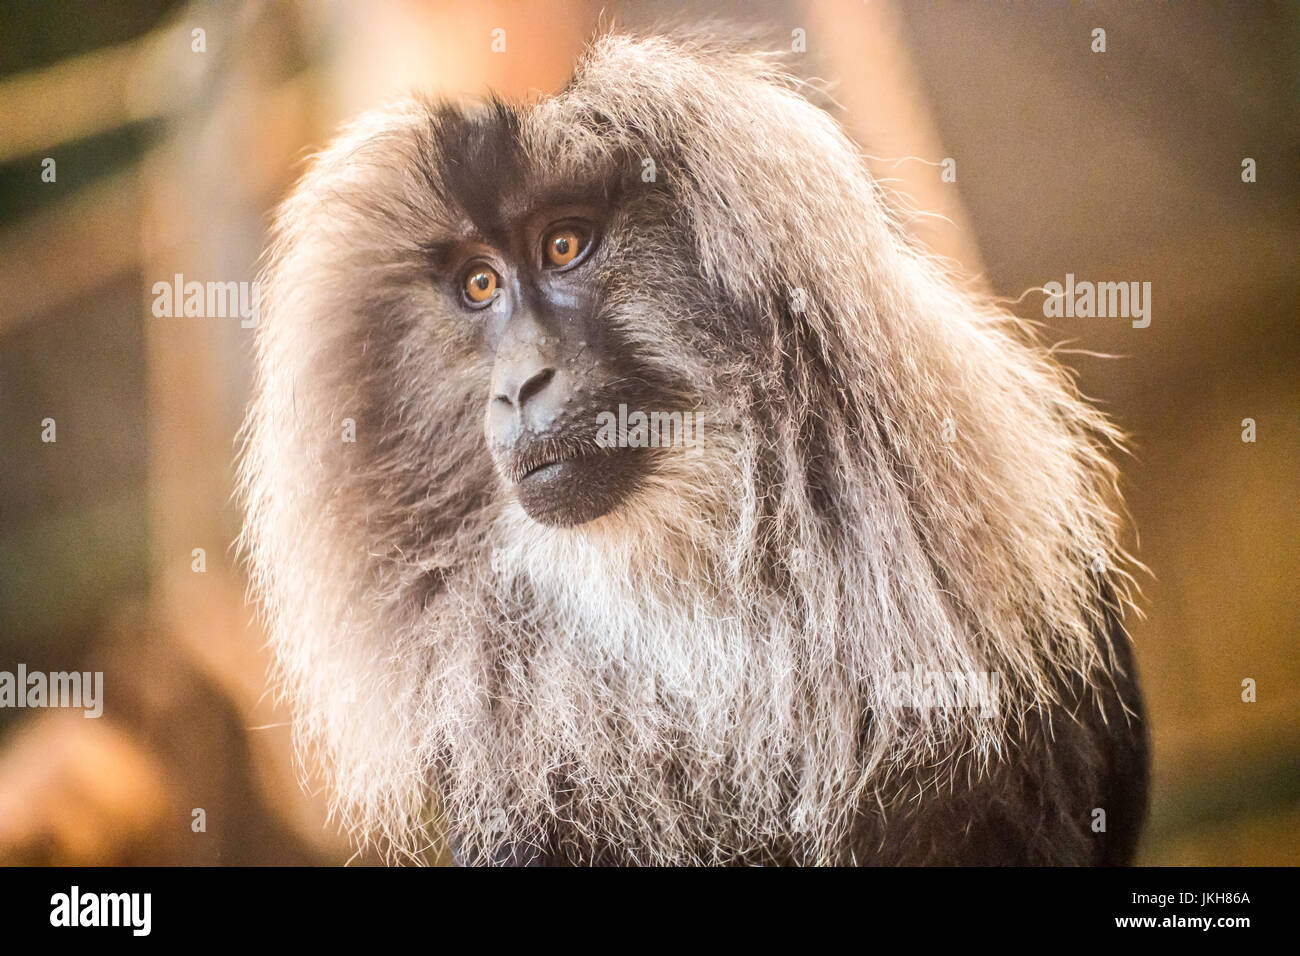 Howler monkey with long grey hair Stock Photo